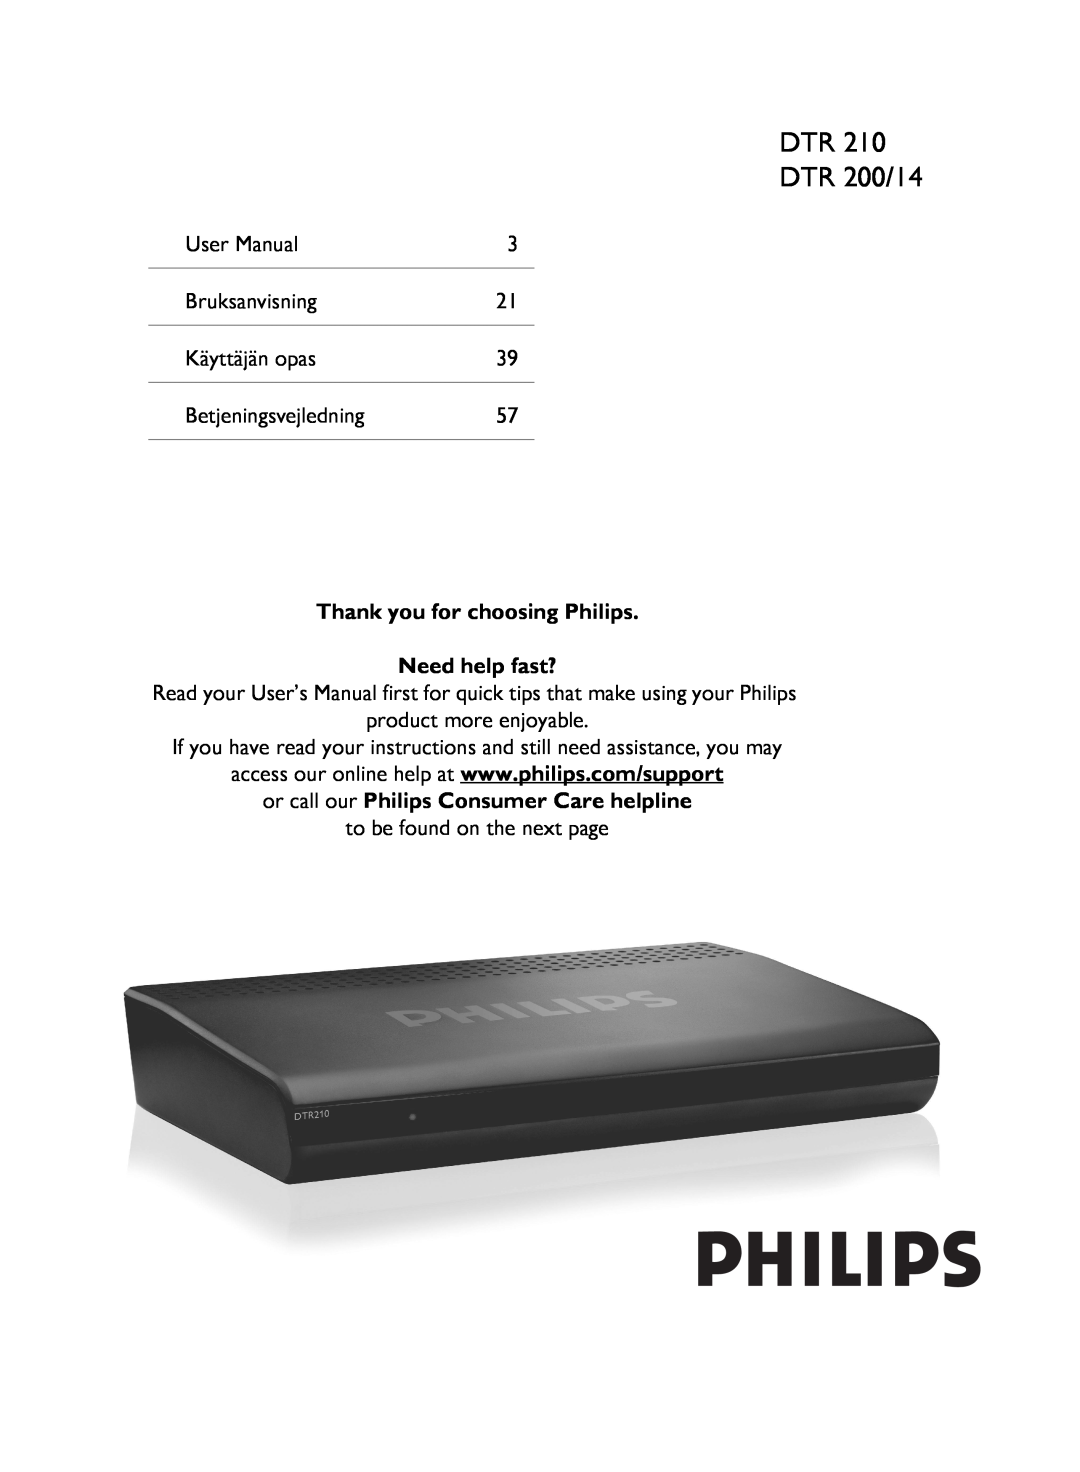 Philips 210 manual 42PFL7409D/30 47PFL7409D/30 32PFL5609D/30 42PFL5609D/30 47PFL5609D/30, non-contractual image 